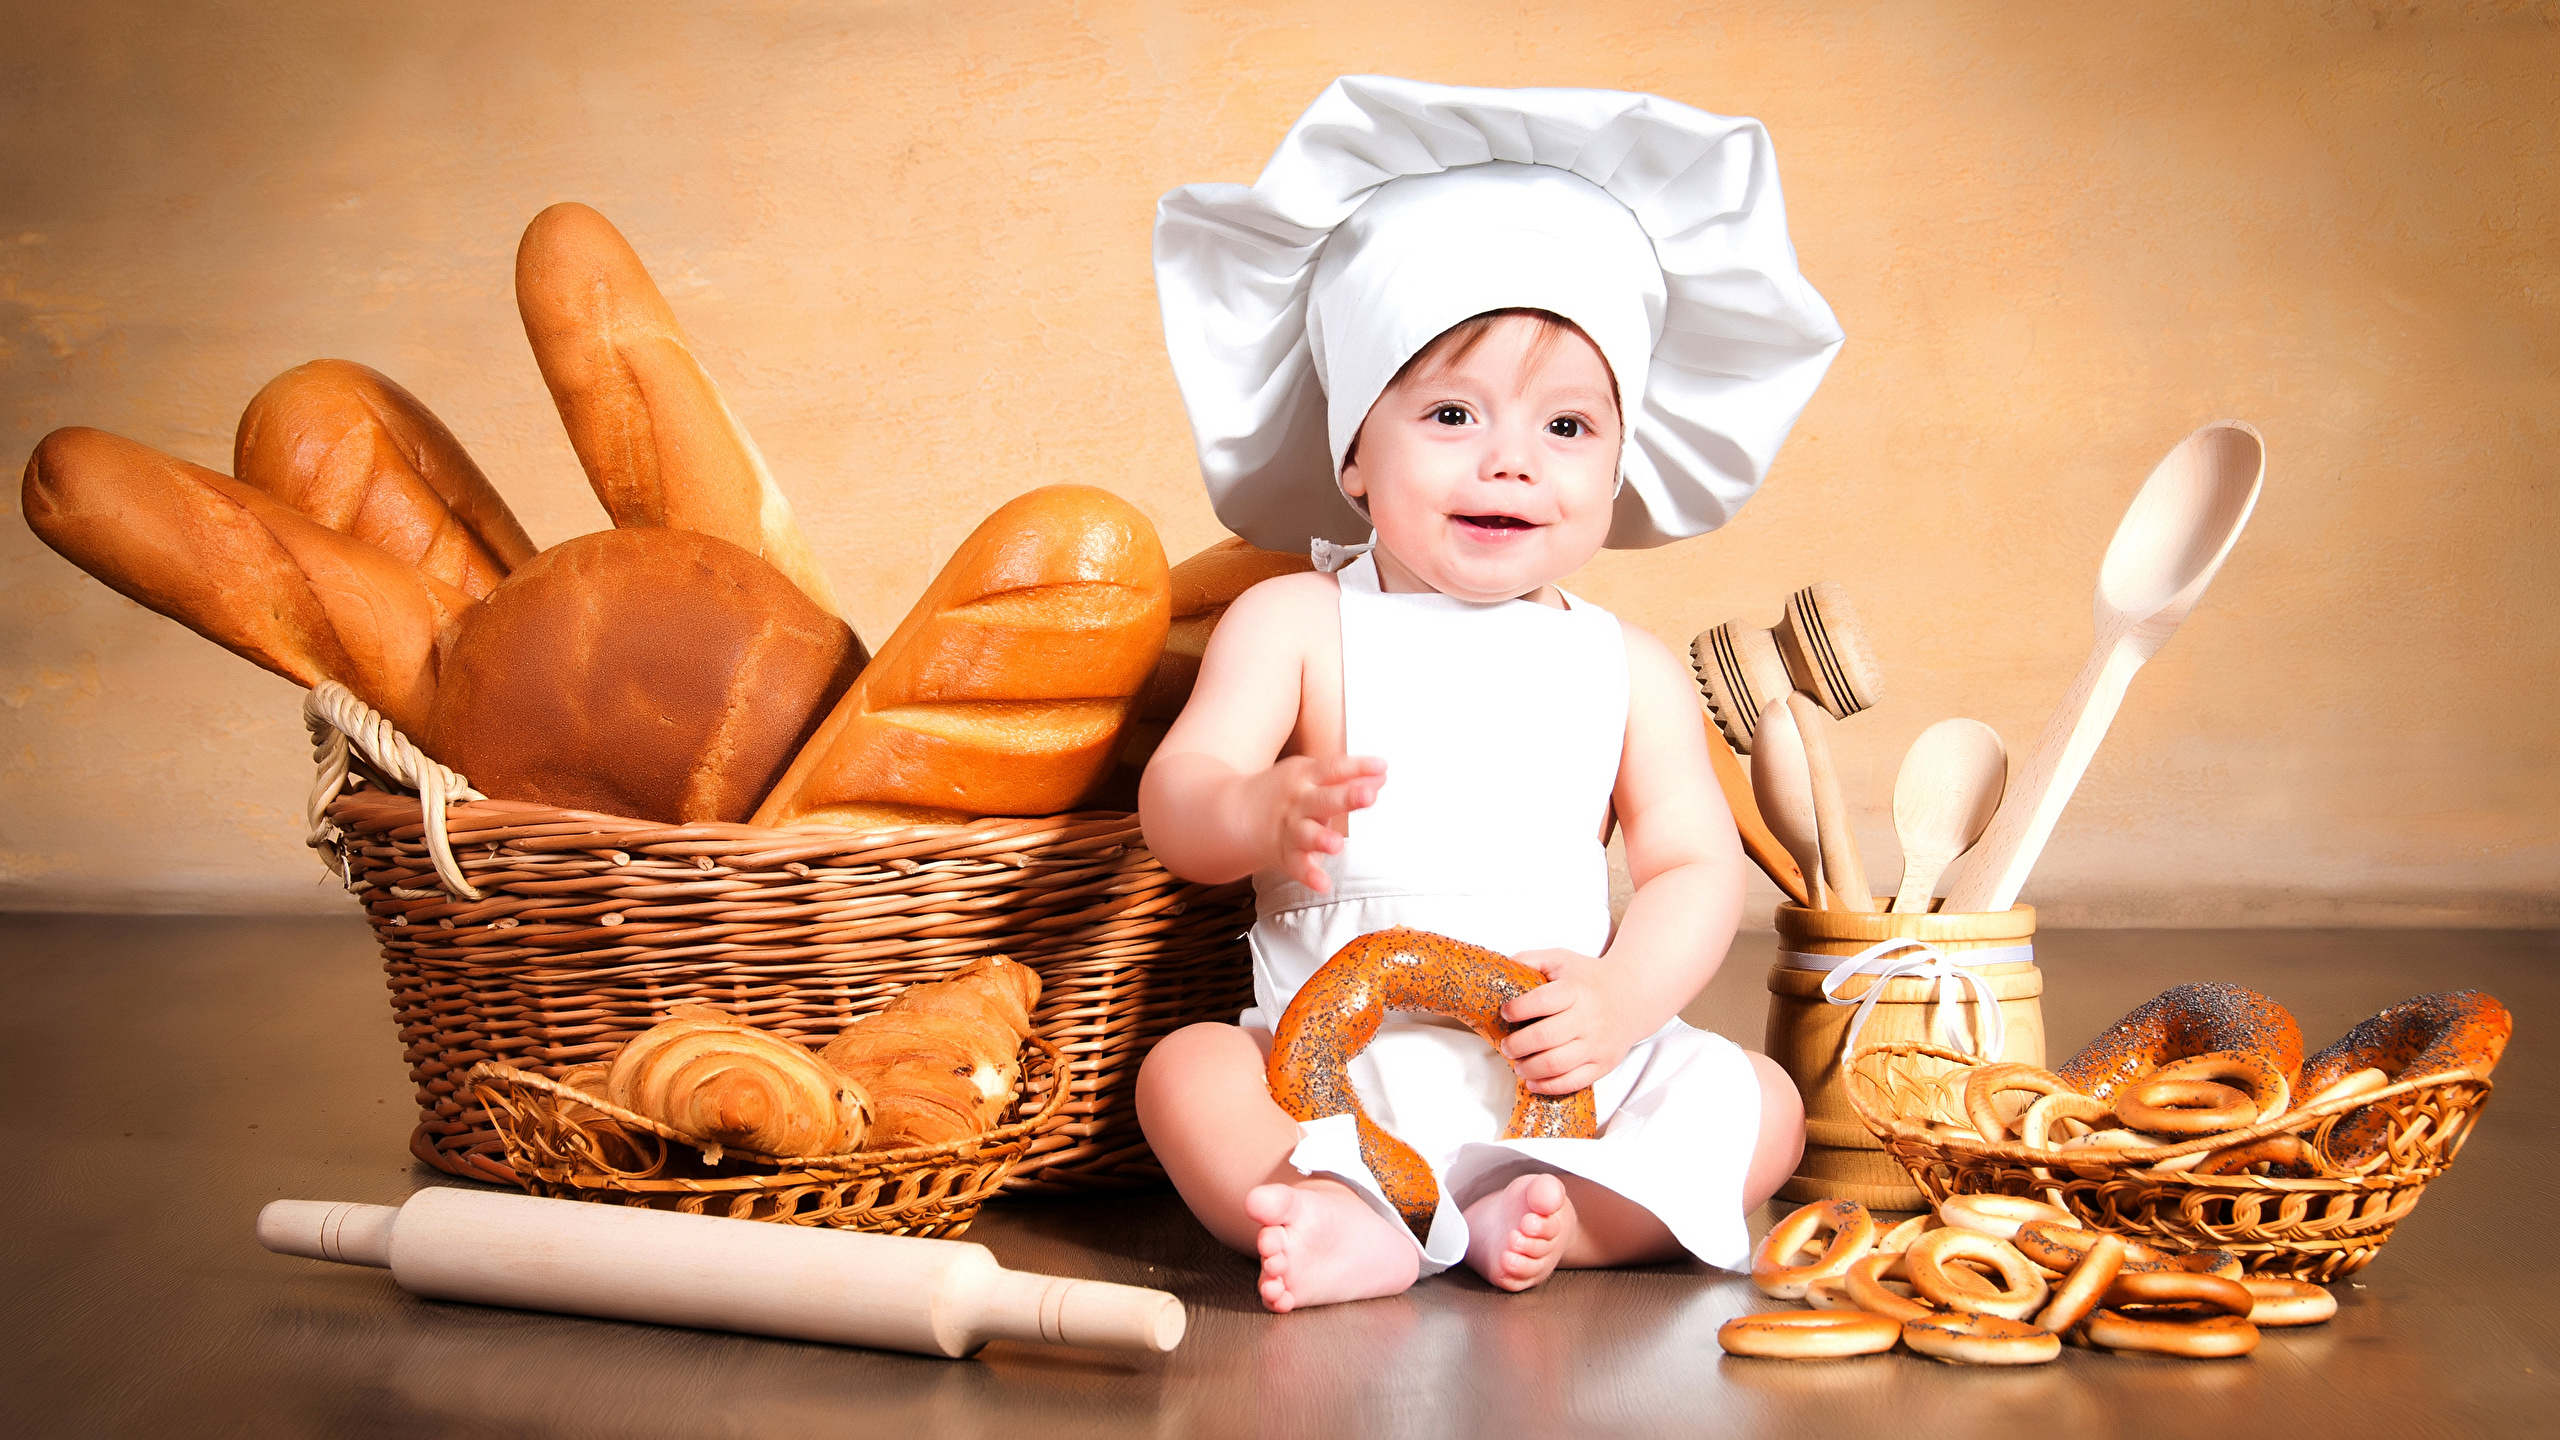 Baby Chef Eating Bread - HD Wallpaper 